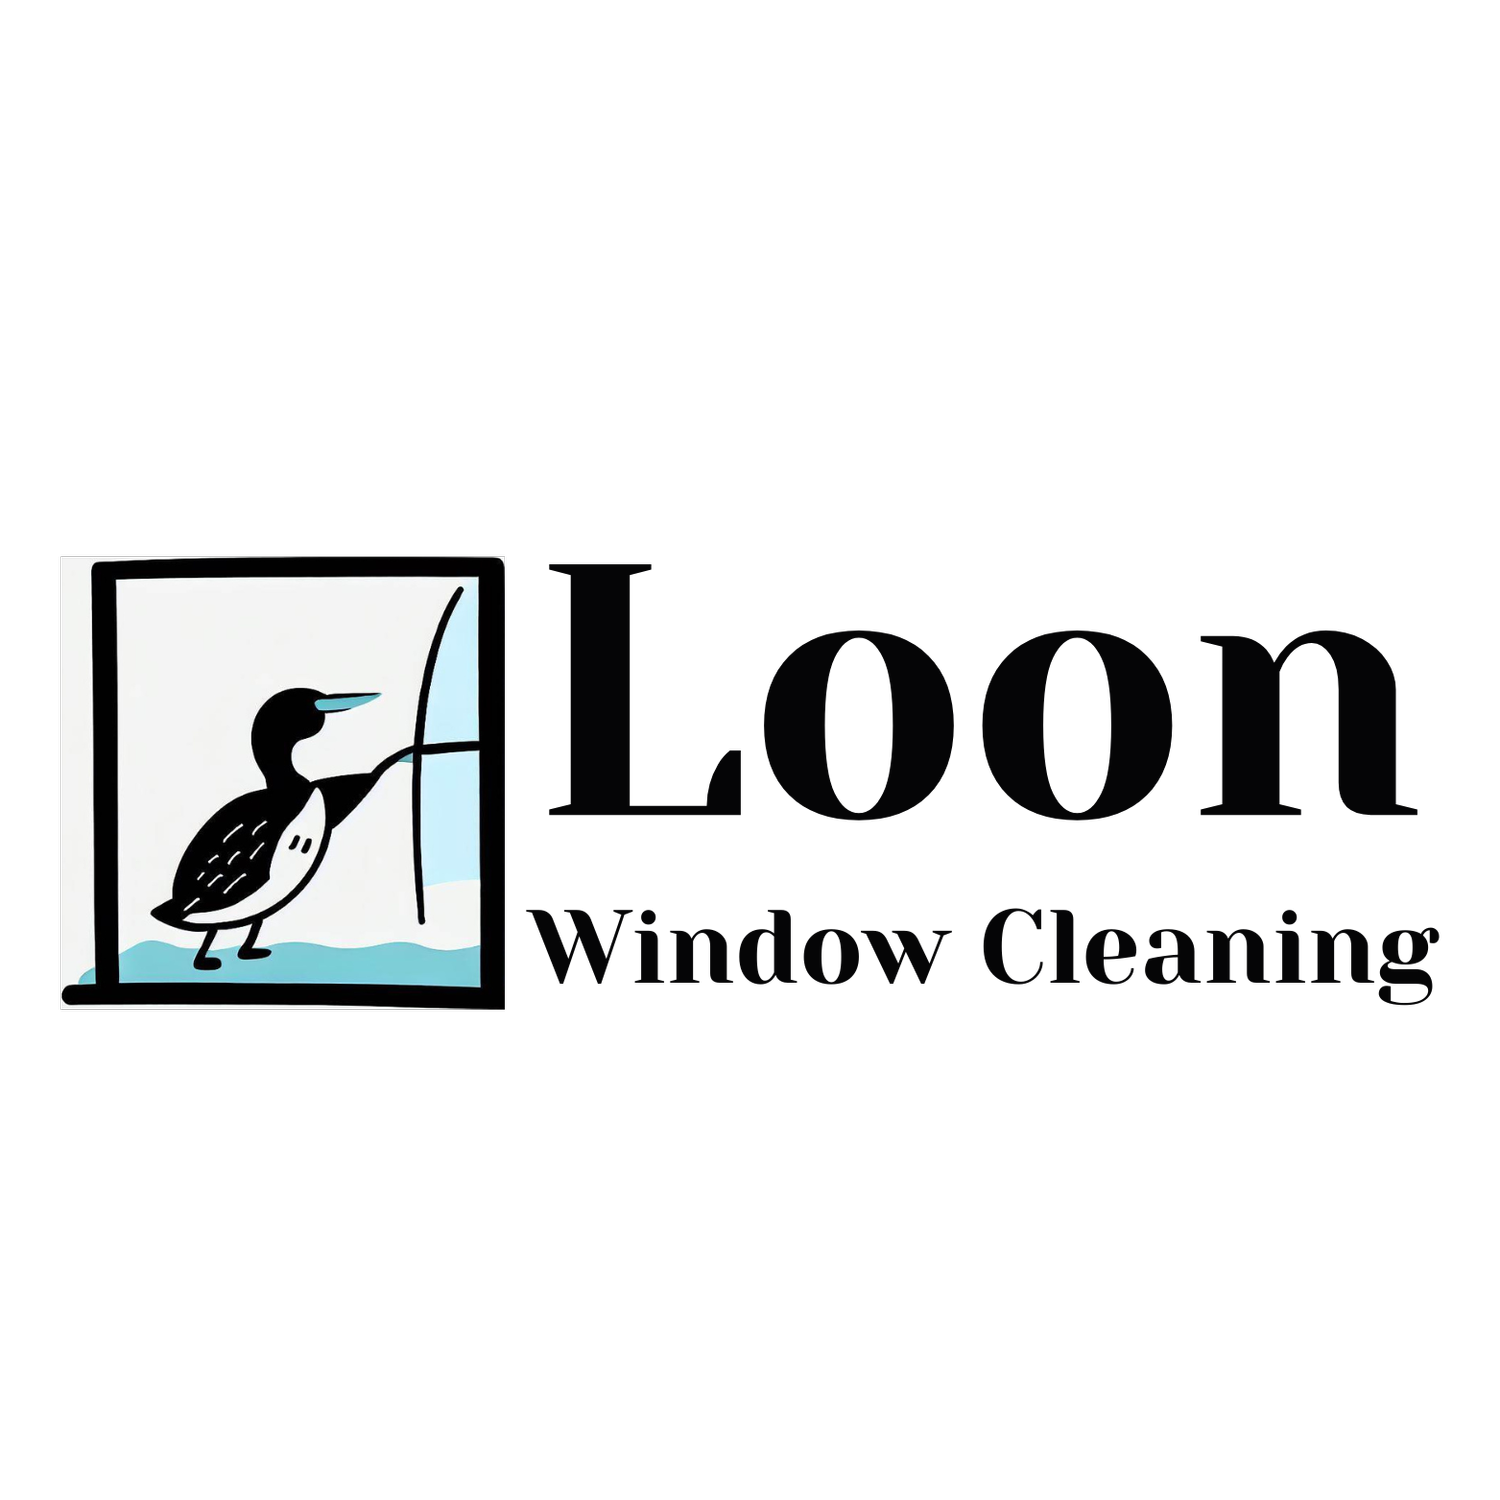 Home and Commercial Window Cleaning  in Austin Texas